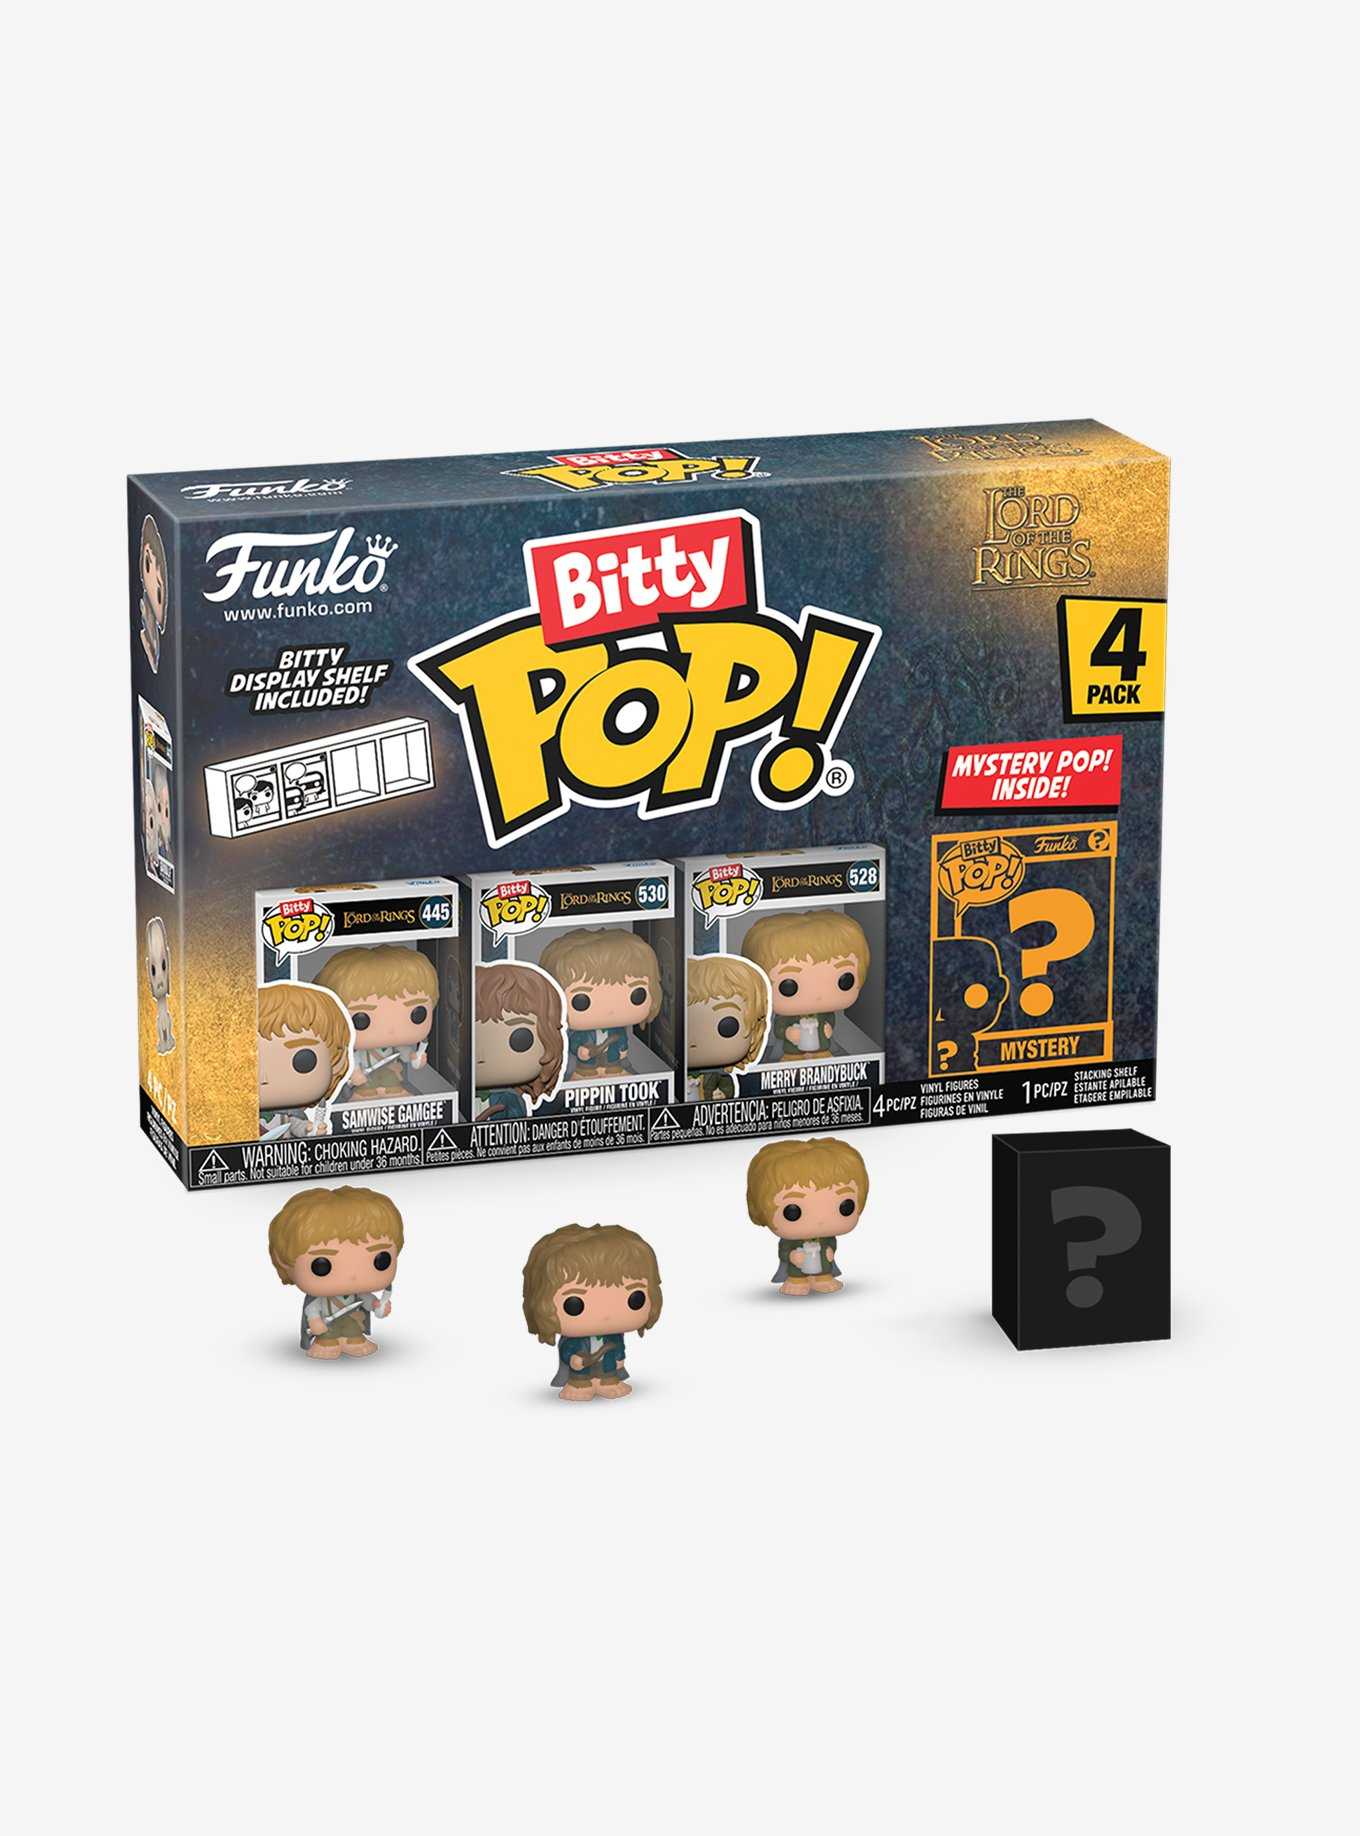 Funko Bitty Pop! The Lord of the Rings Samwise and Hobbits Blind Box Mini Vinyl Figure Set, , hi-res